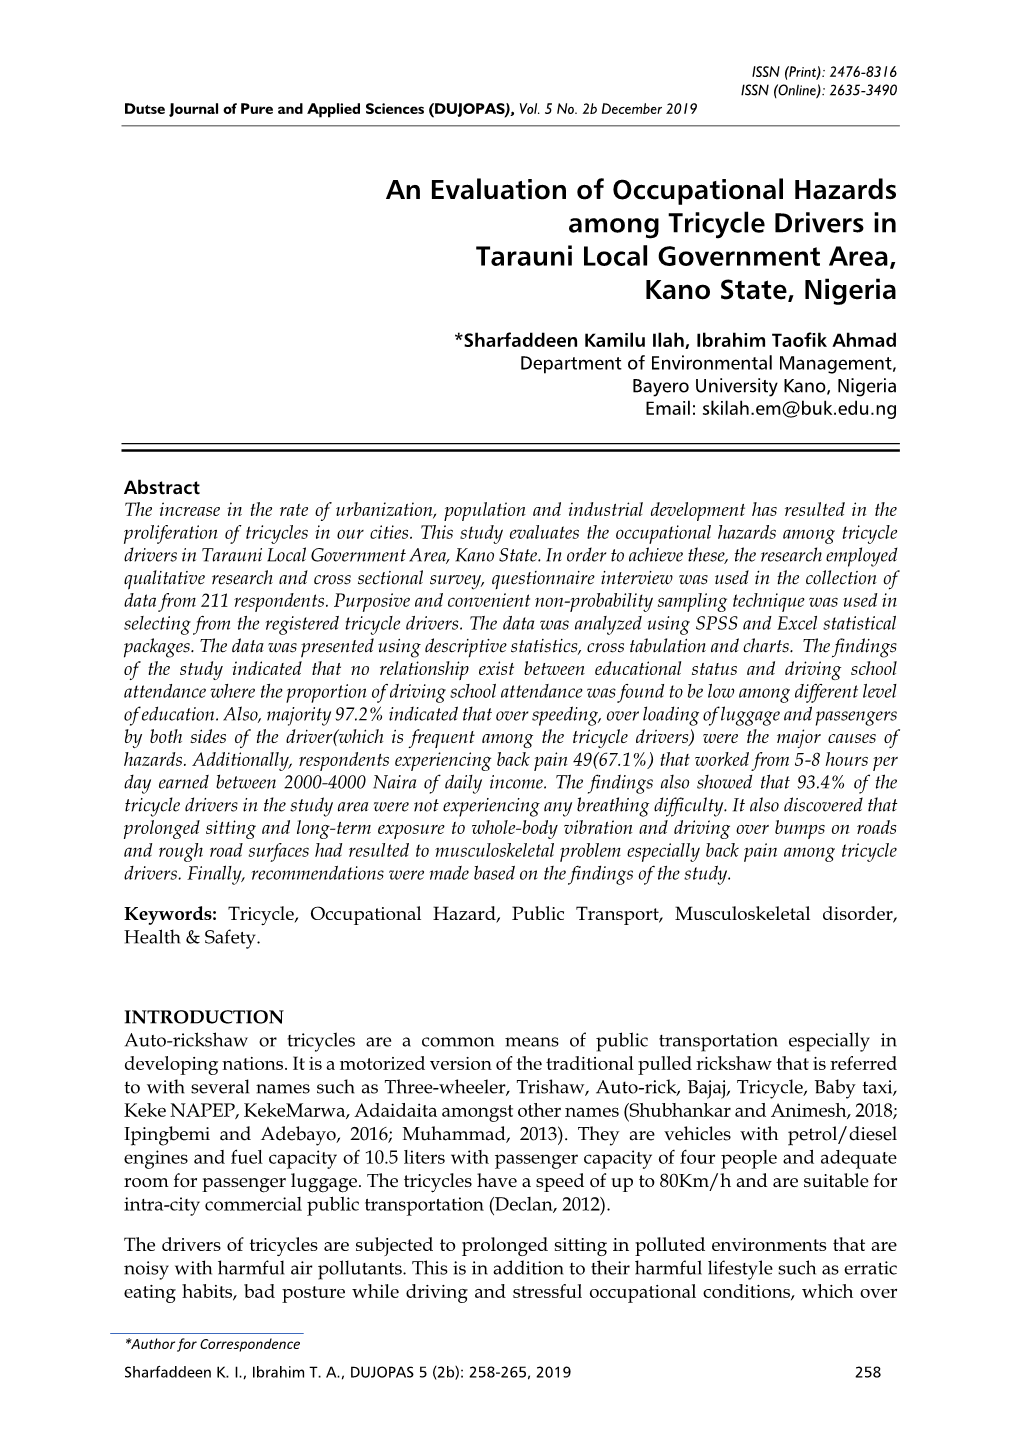 An Evaluation of Occupational Hazards Among Tricycle Drivers in Tarauni Local Government Area, Kano State, Nigeria